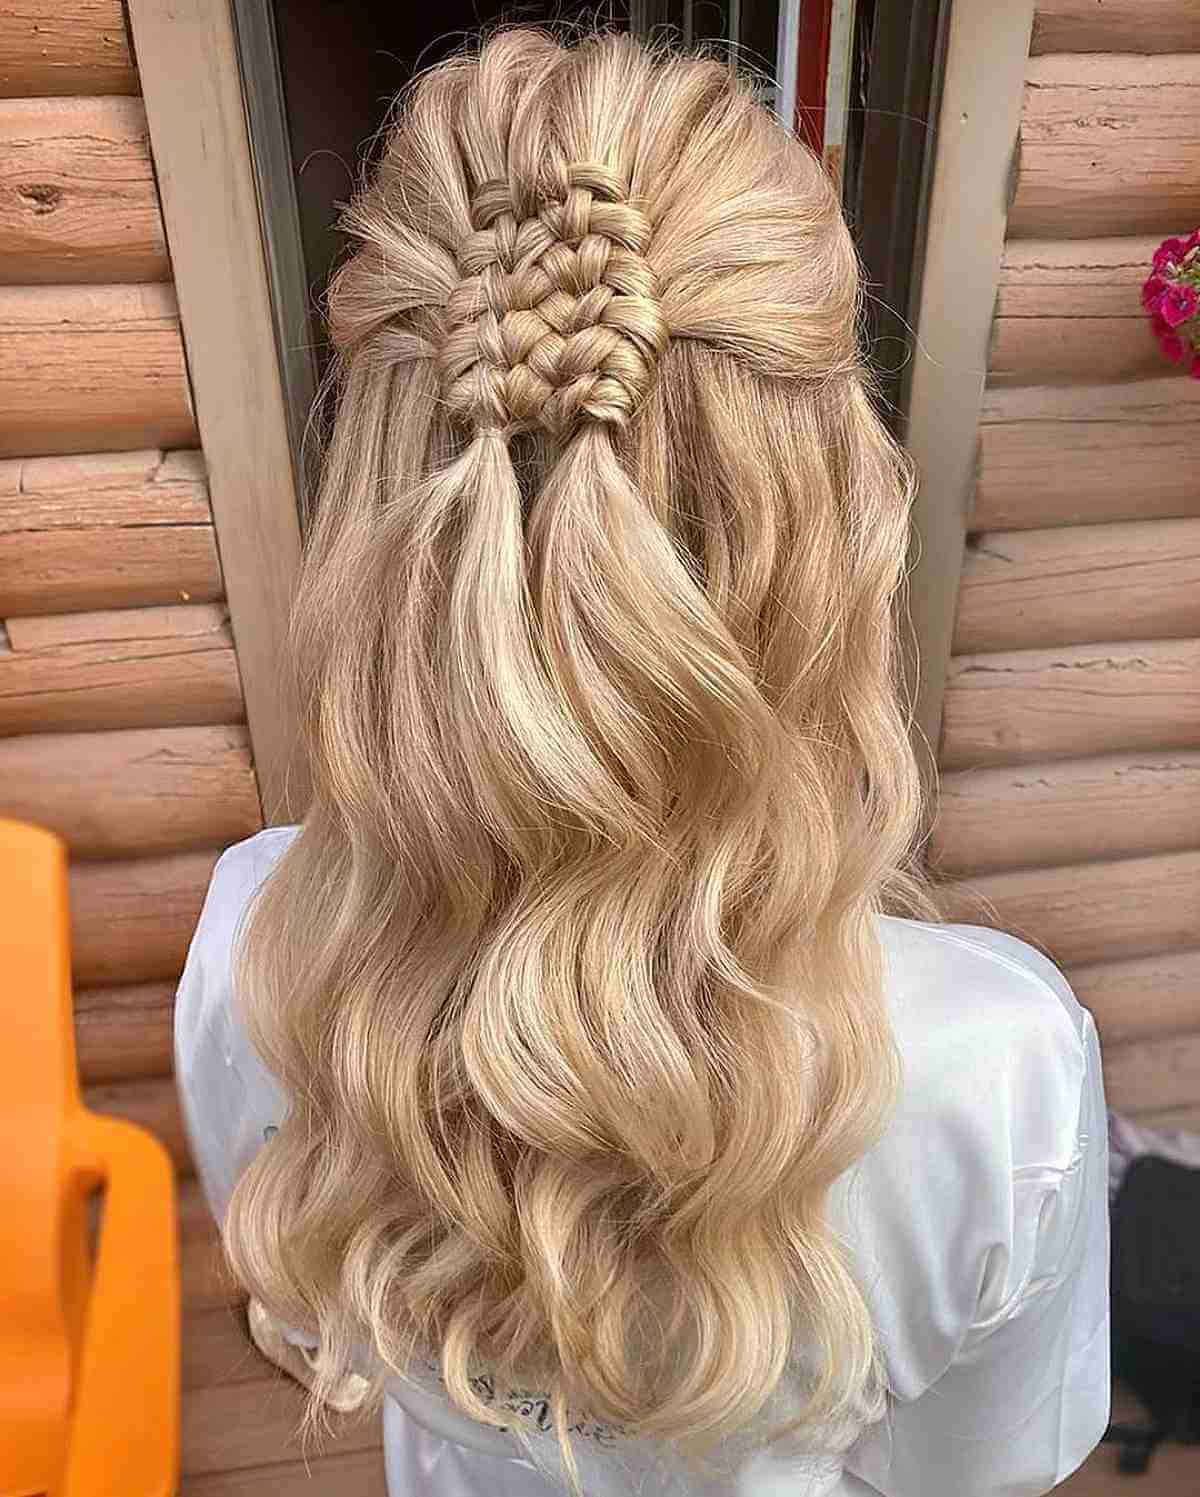 Long Double Ladder Braid Style for Weddings